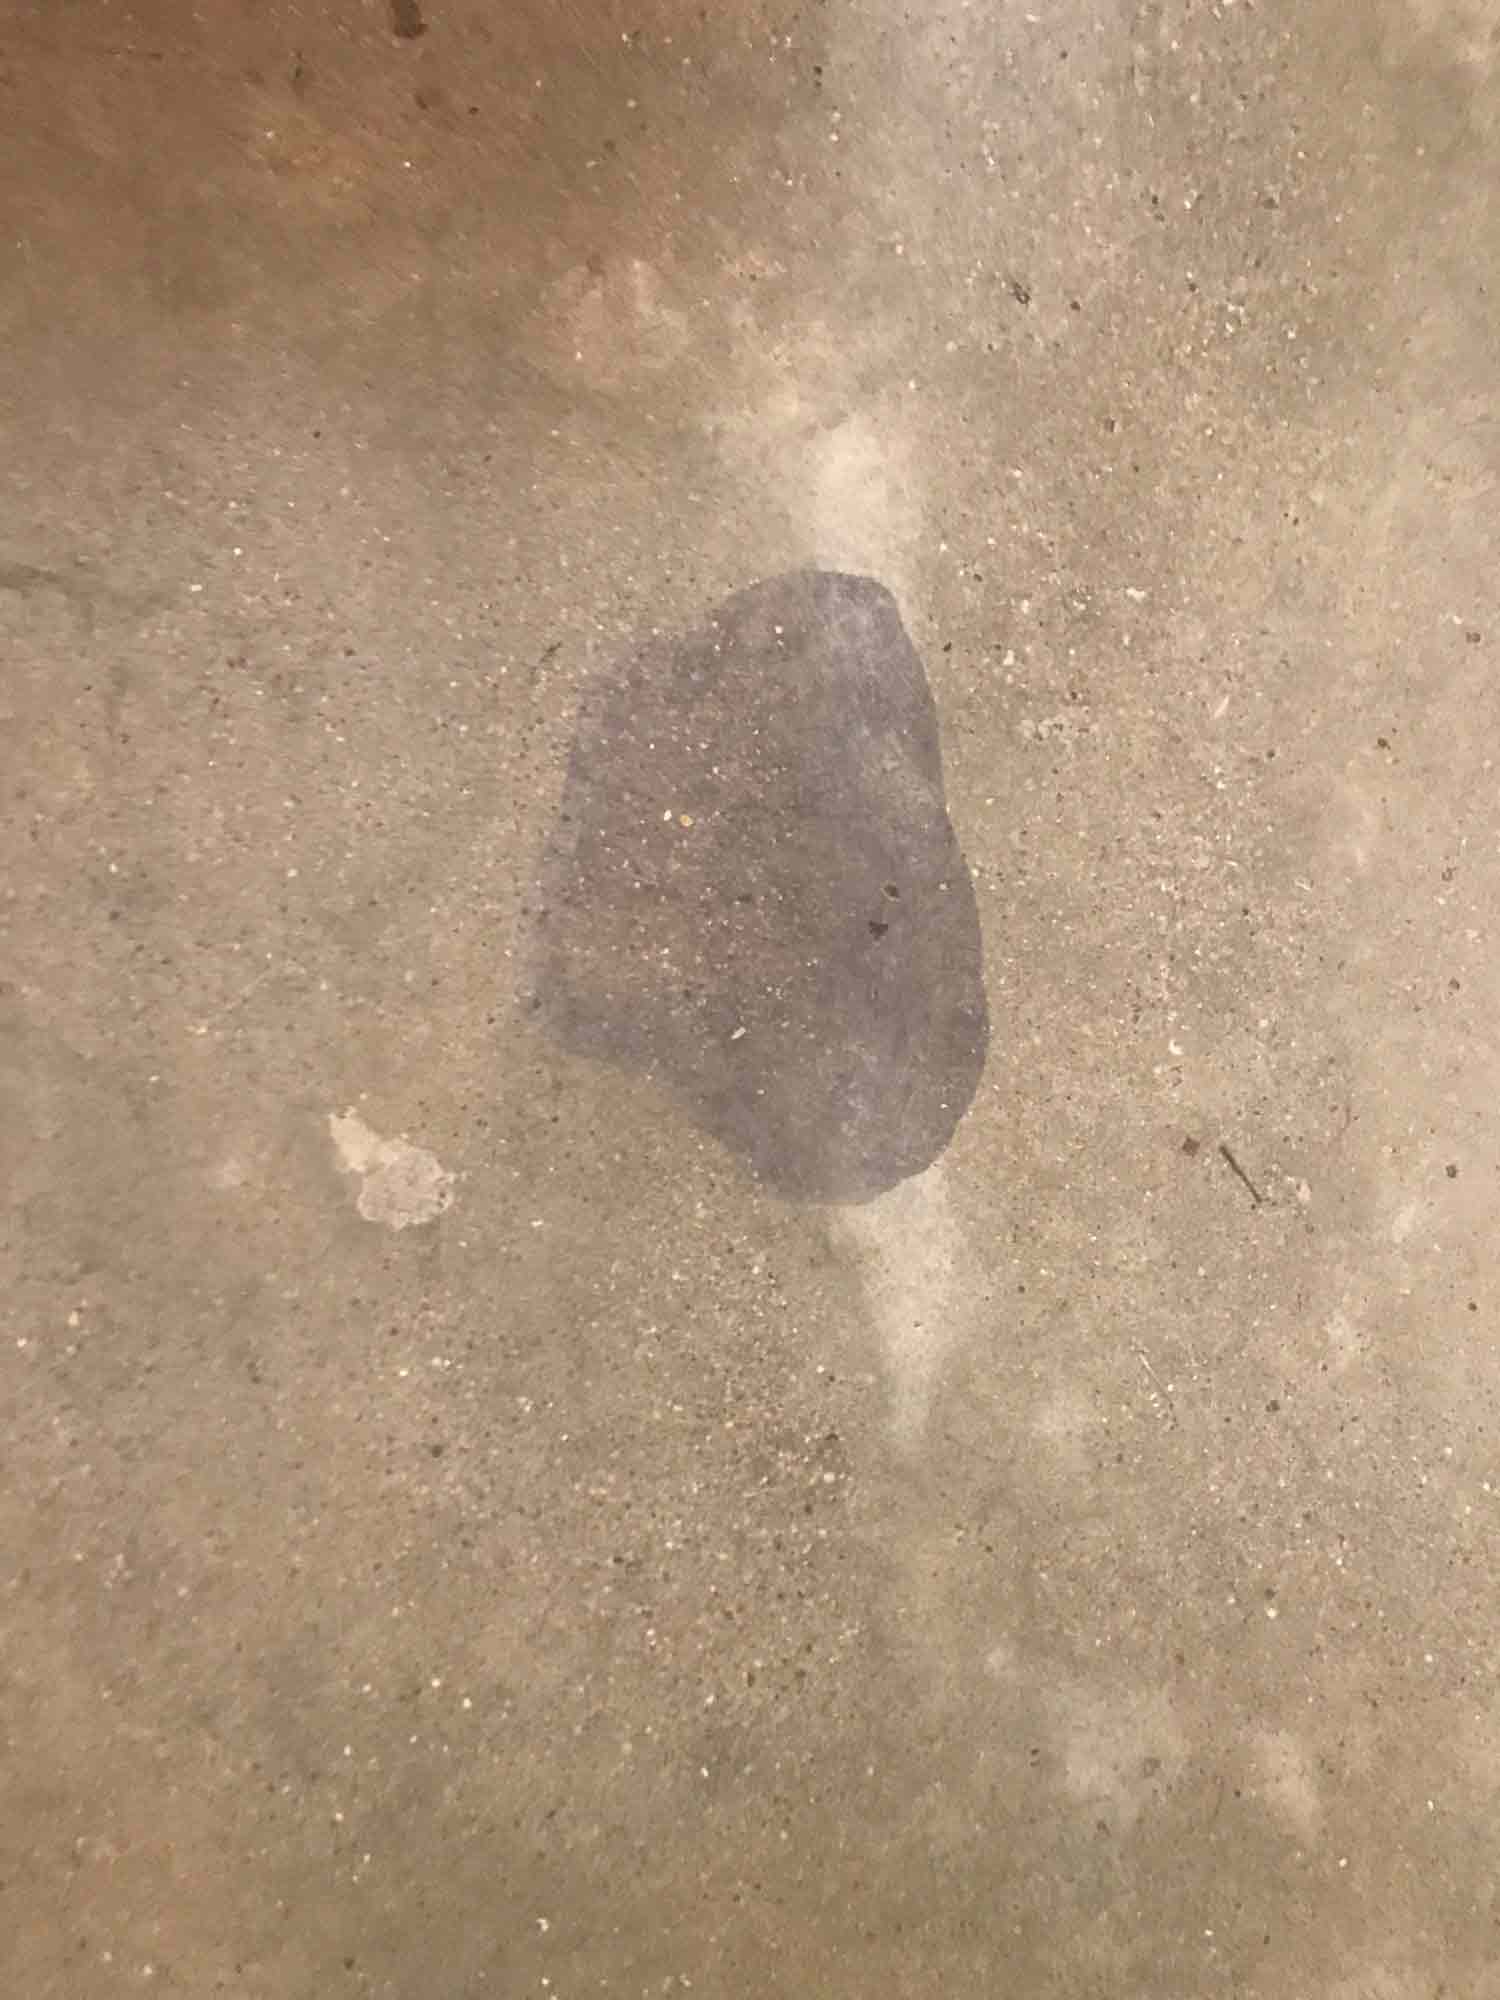 A red wine stain on a polished concrete floor.